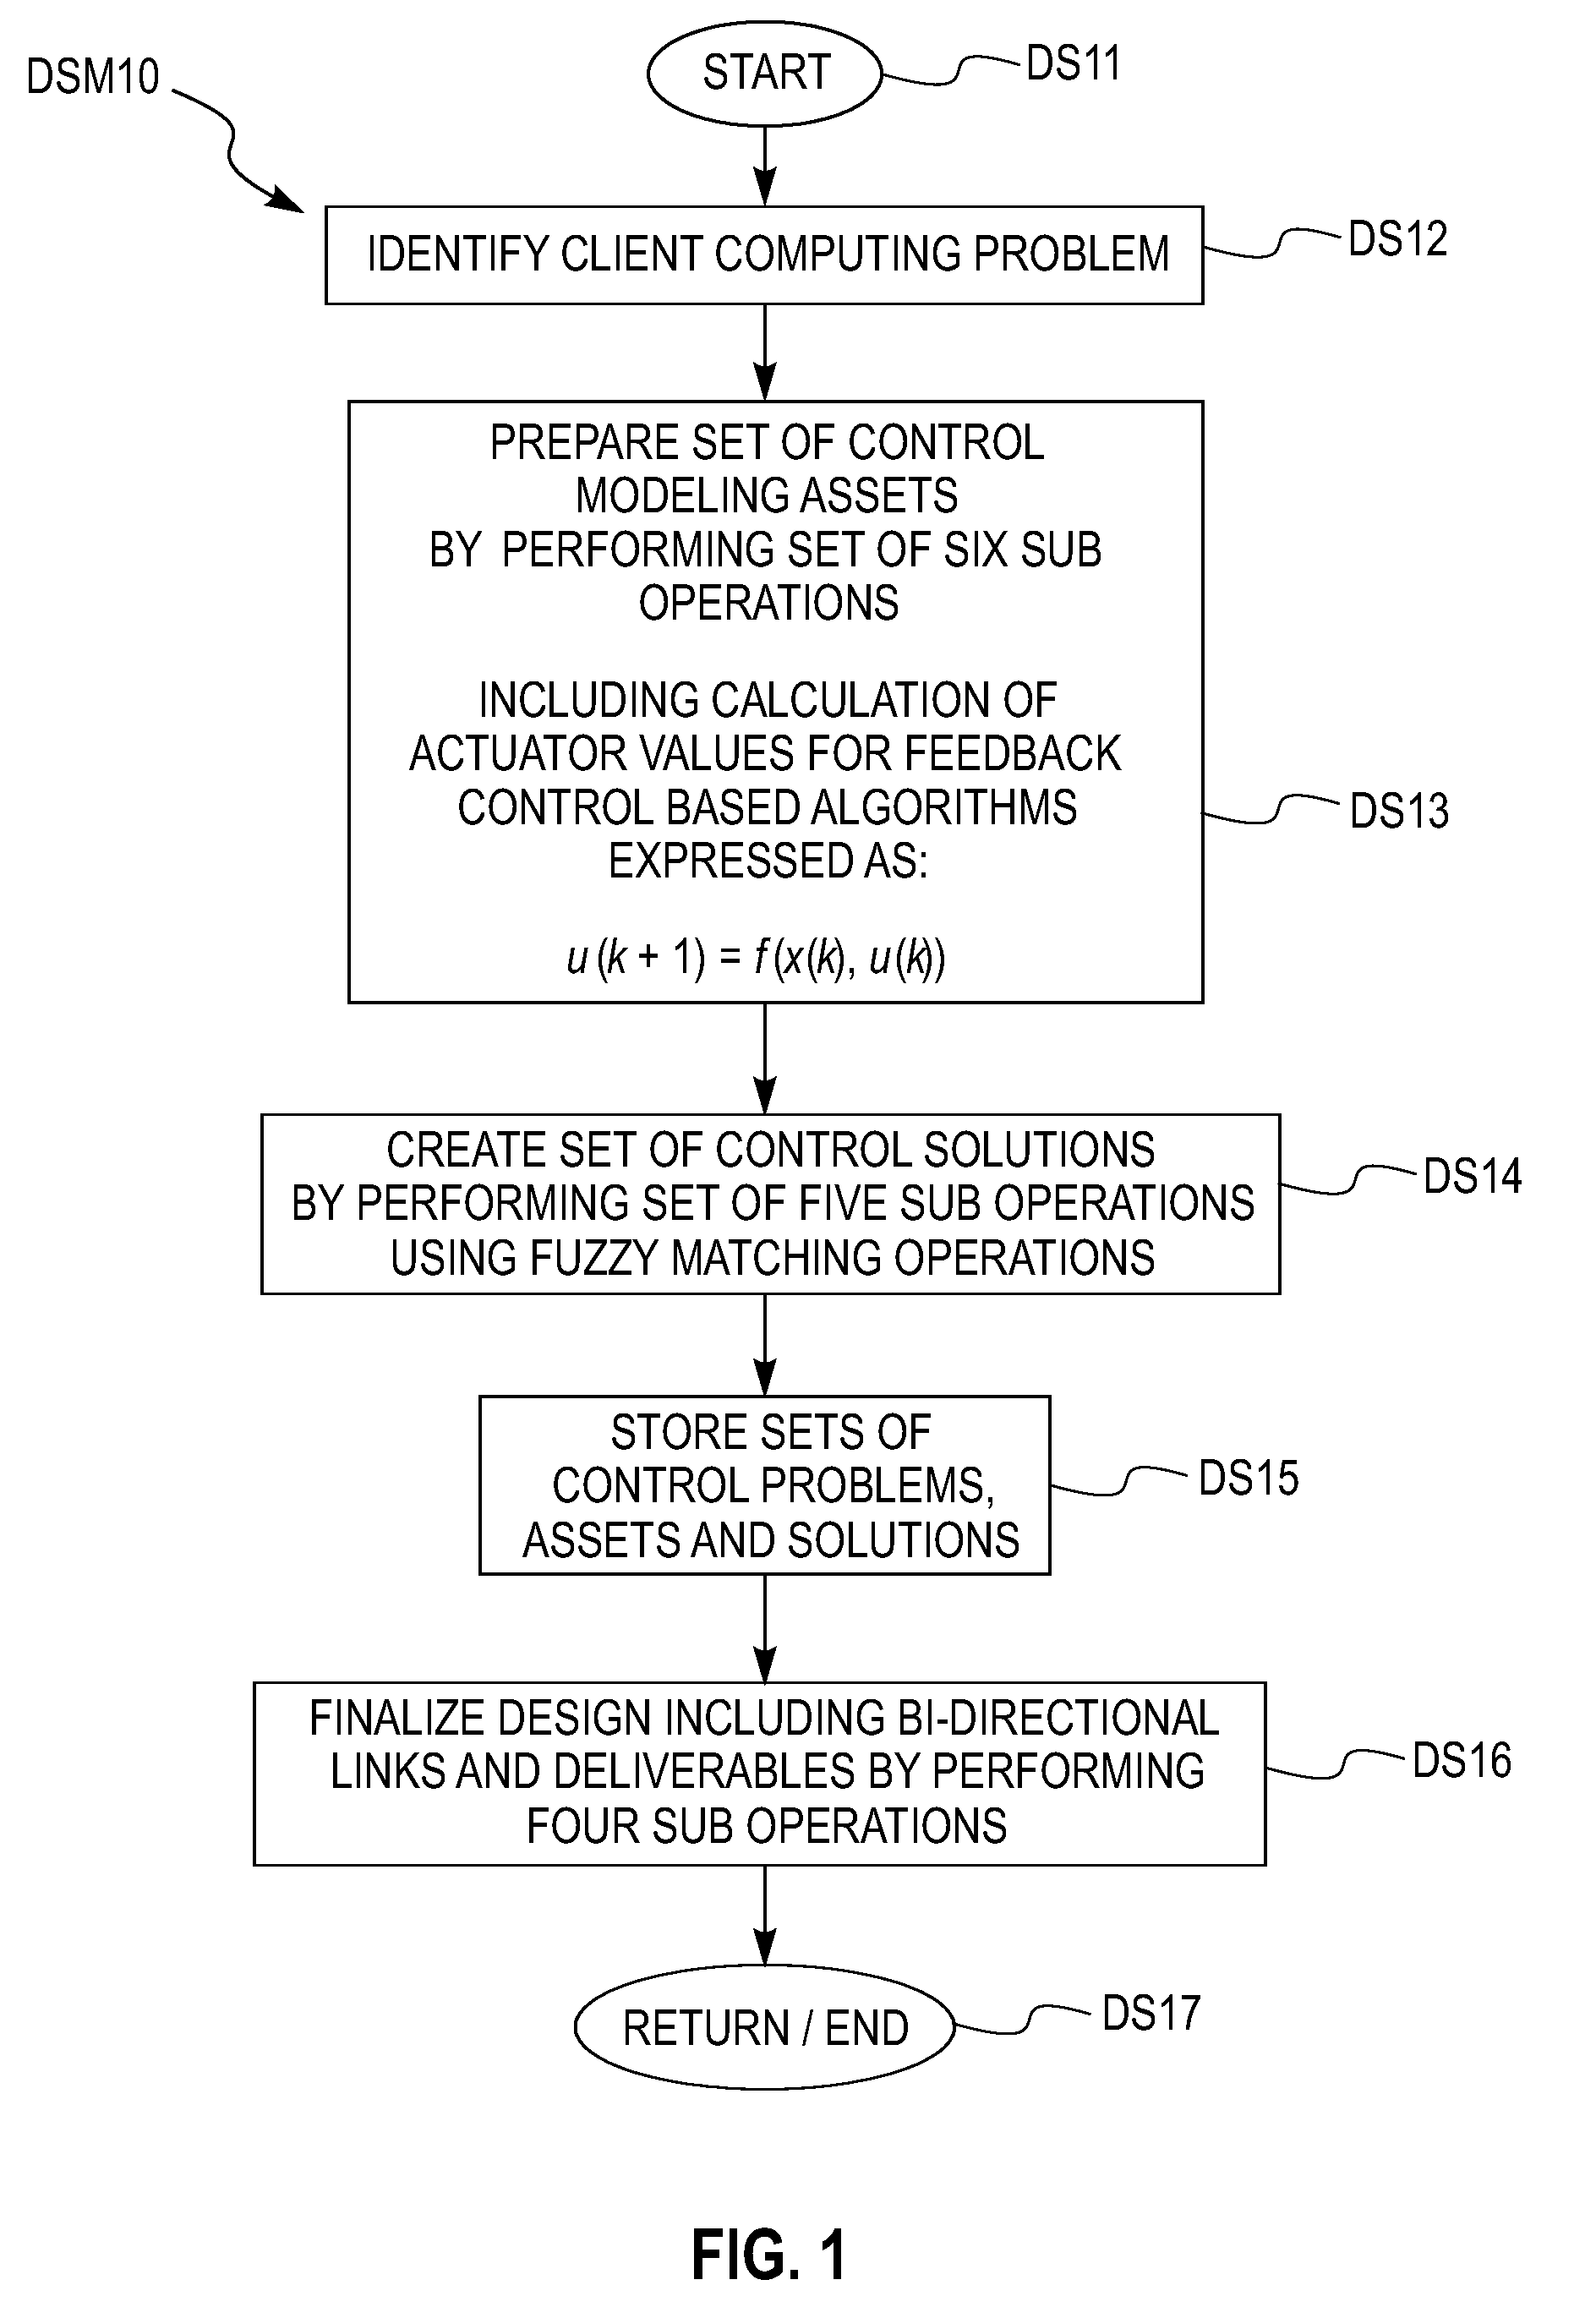 System and method for service offering for feedback controller design and implementation for performance management in information technology systems